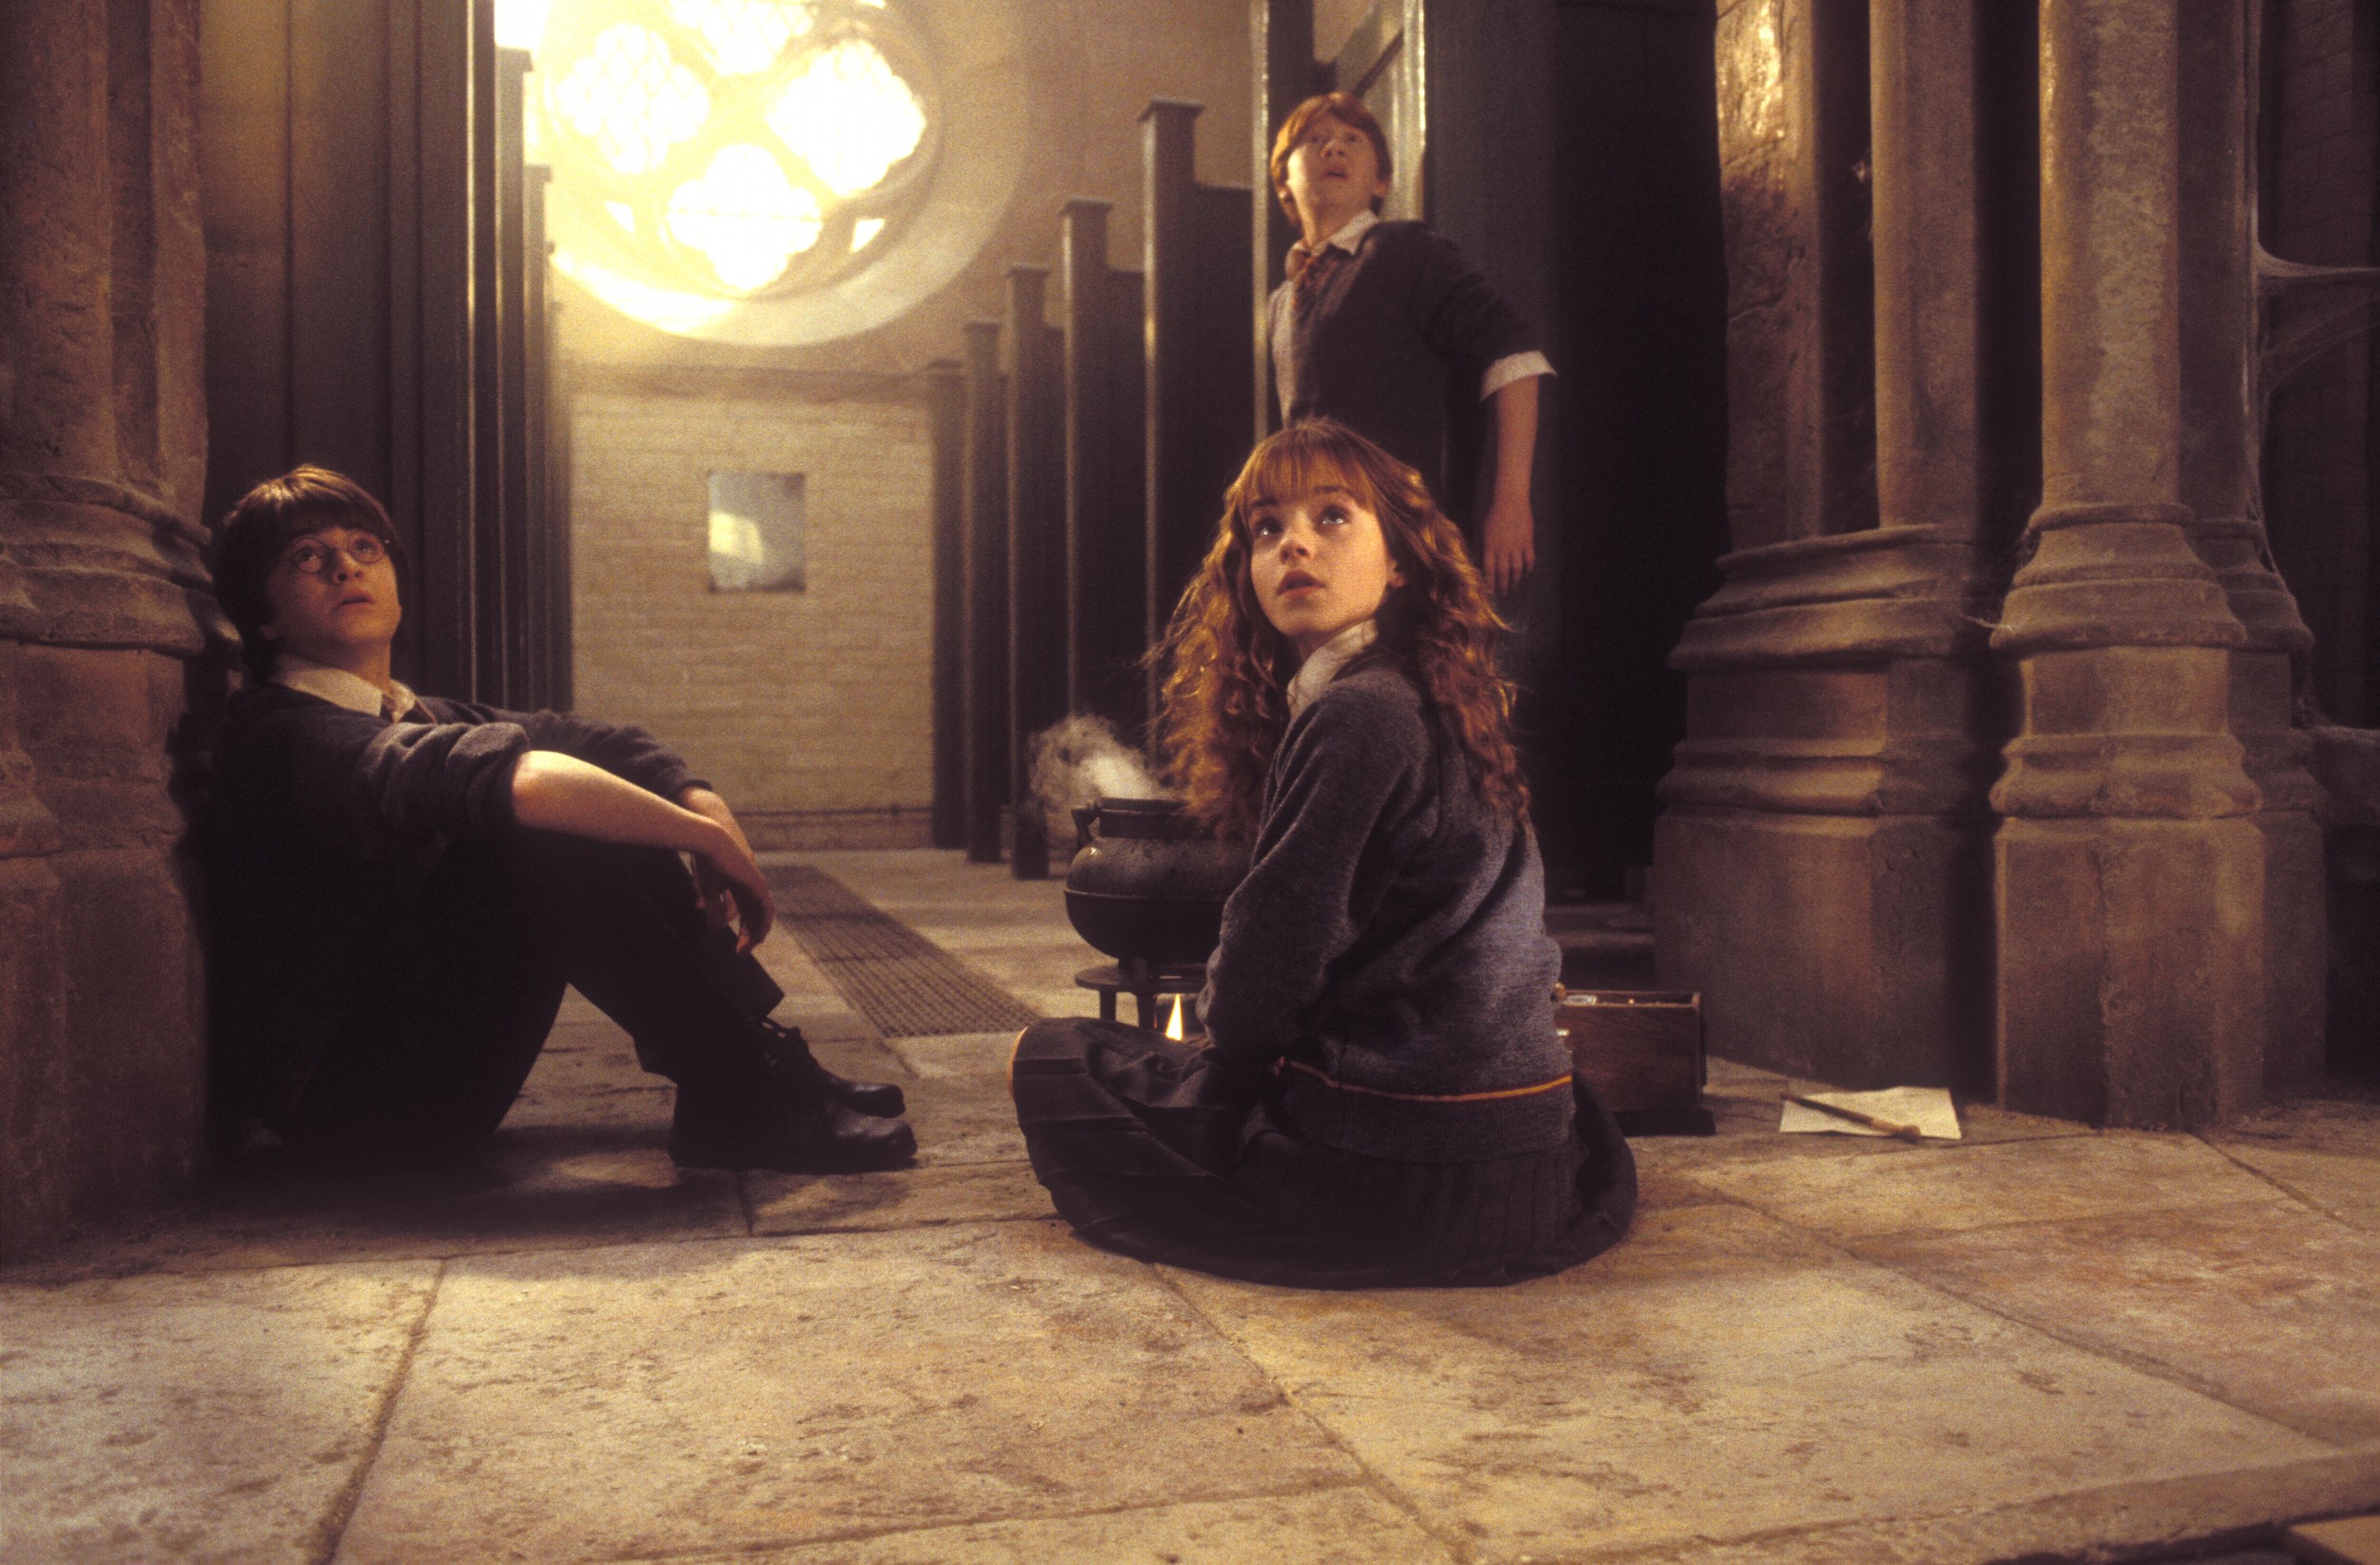 harry potter, movie, harry potter and the chamber of secrets, daniel radcliffe, emma watson, hermione granger, ron weasley, rupert grint